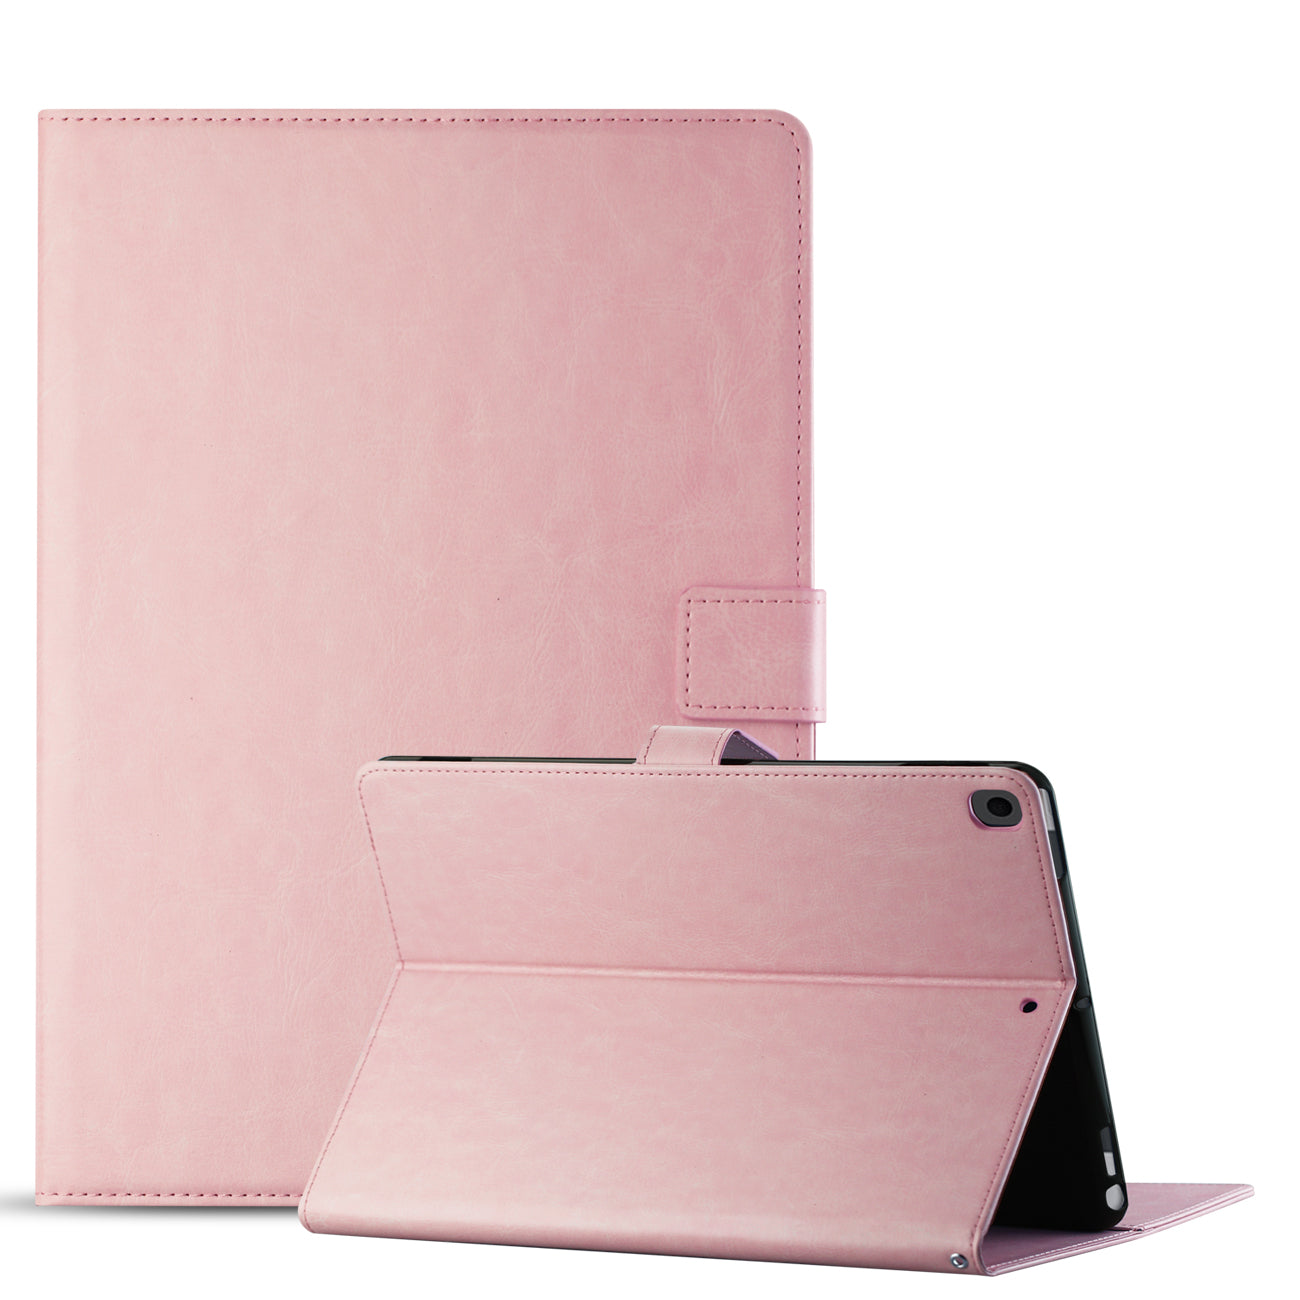 Reiko Leather Folio Cover Protective Case for 10.2" iPad 8 2020 or iPad 7 2019 In Pink